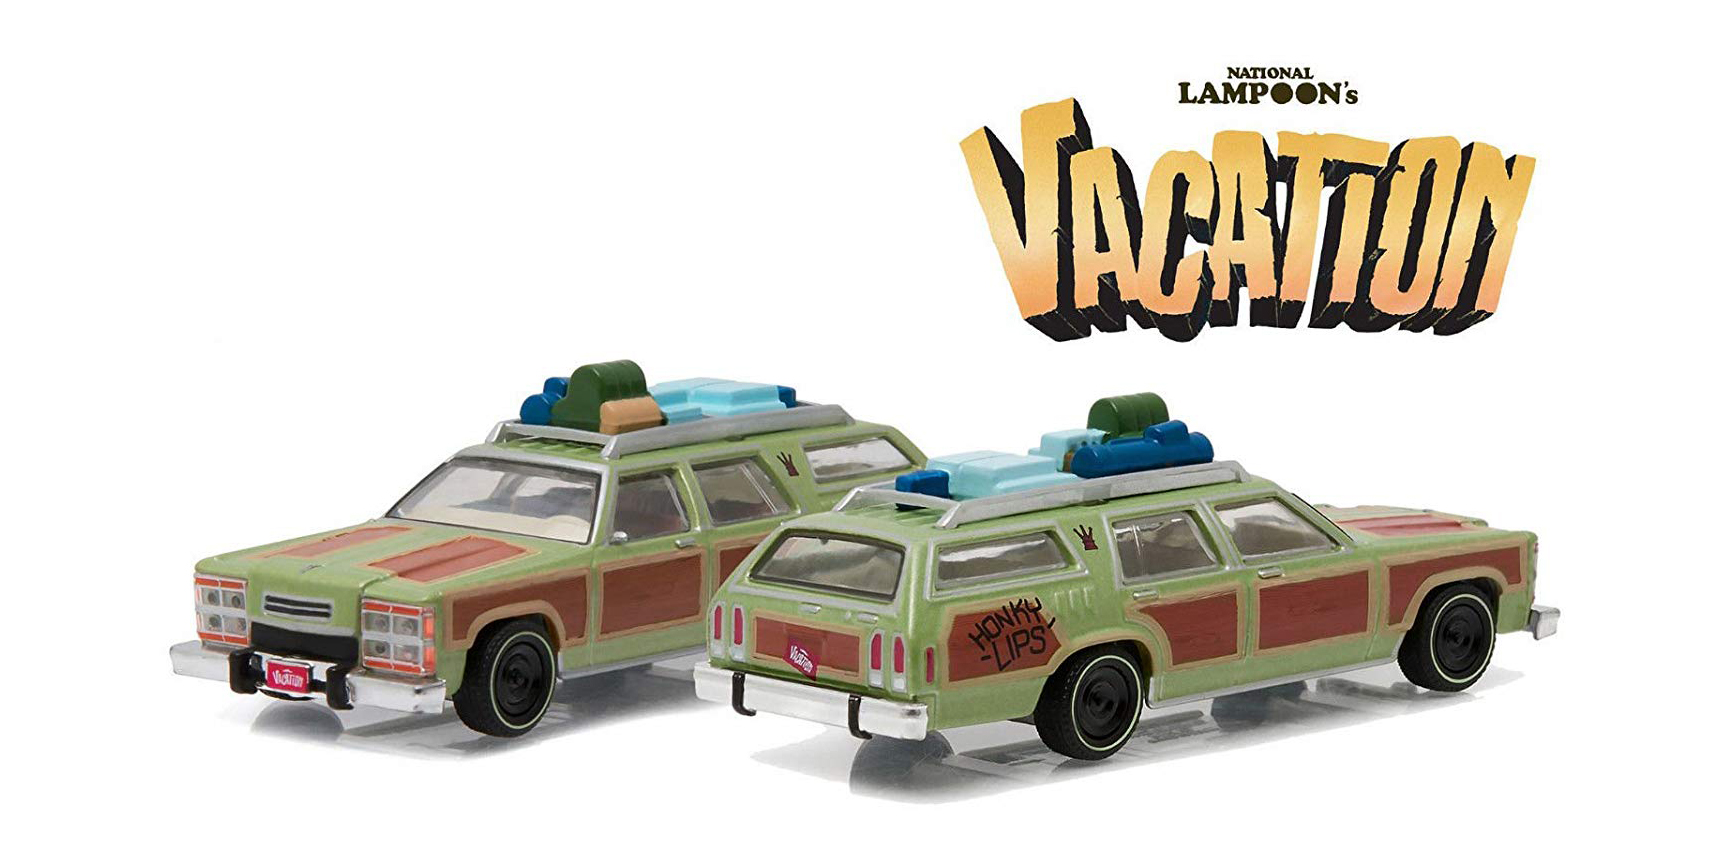 National Lampoons Vaction Station Wagon Goes Up For Auction 9to5toys 